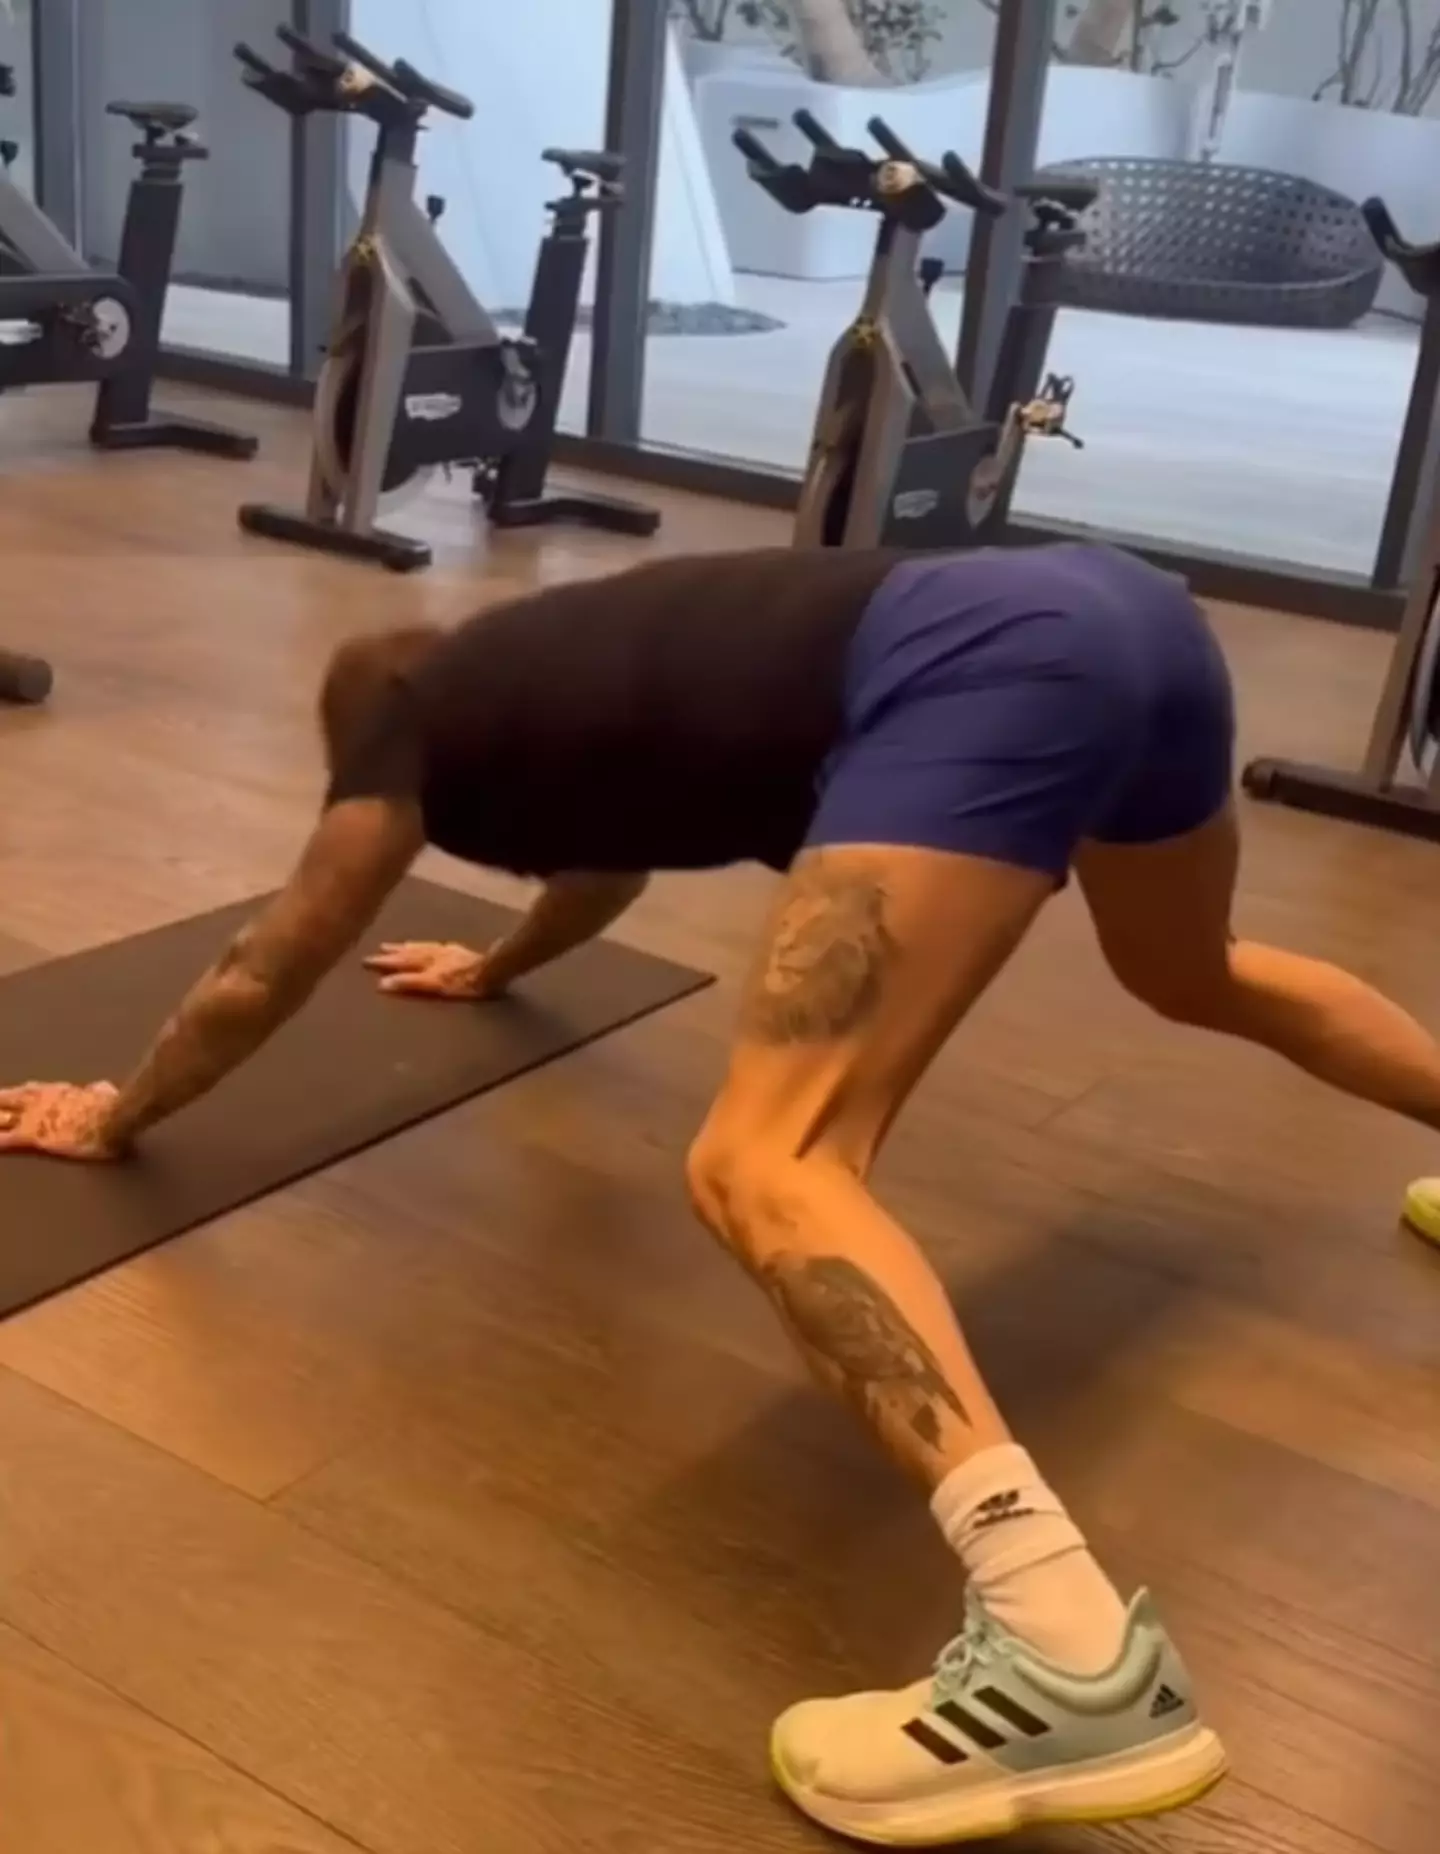 Victoria shared a video of David working out.